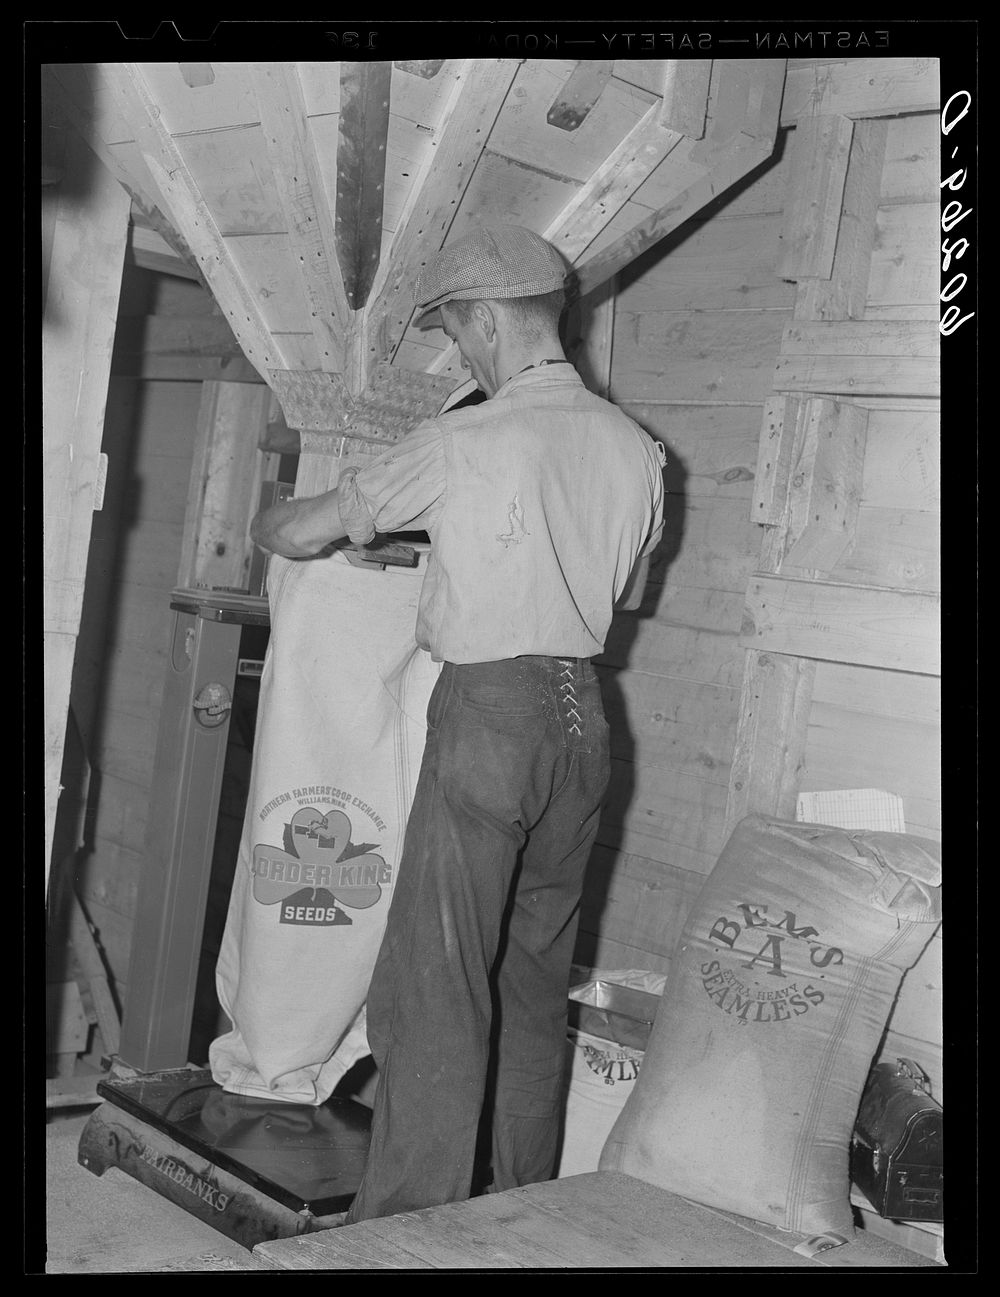 Filling bag with seed at co-op seed exchange. Williams, Minnesota. Sourced from the Library of Congress.